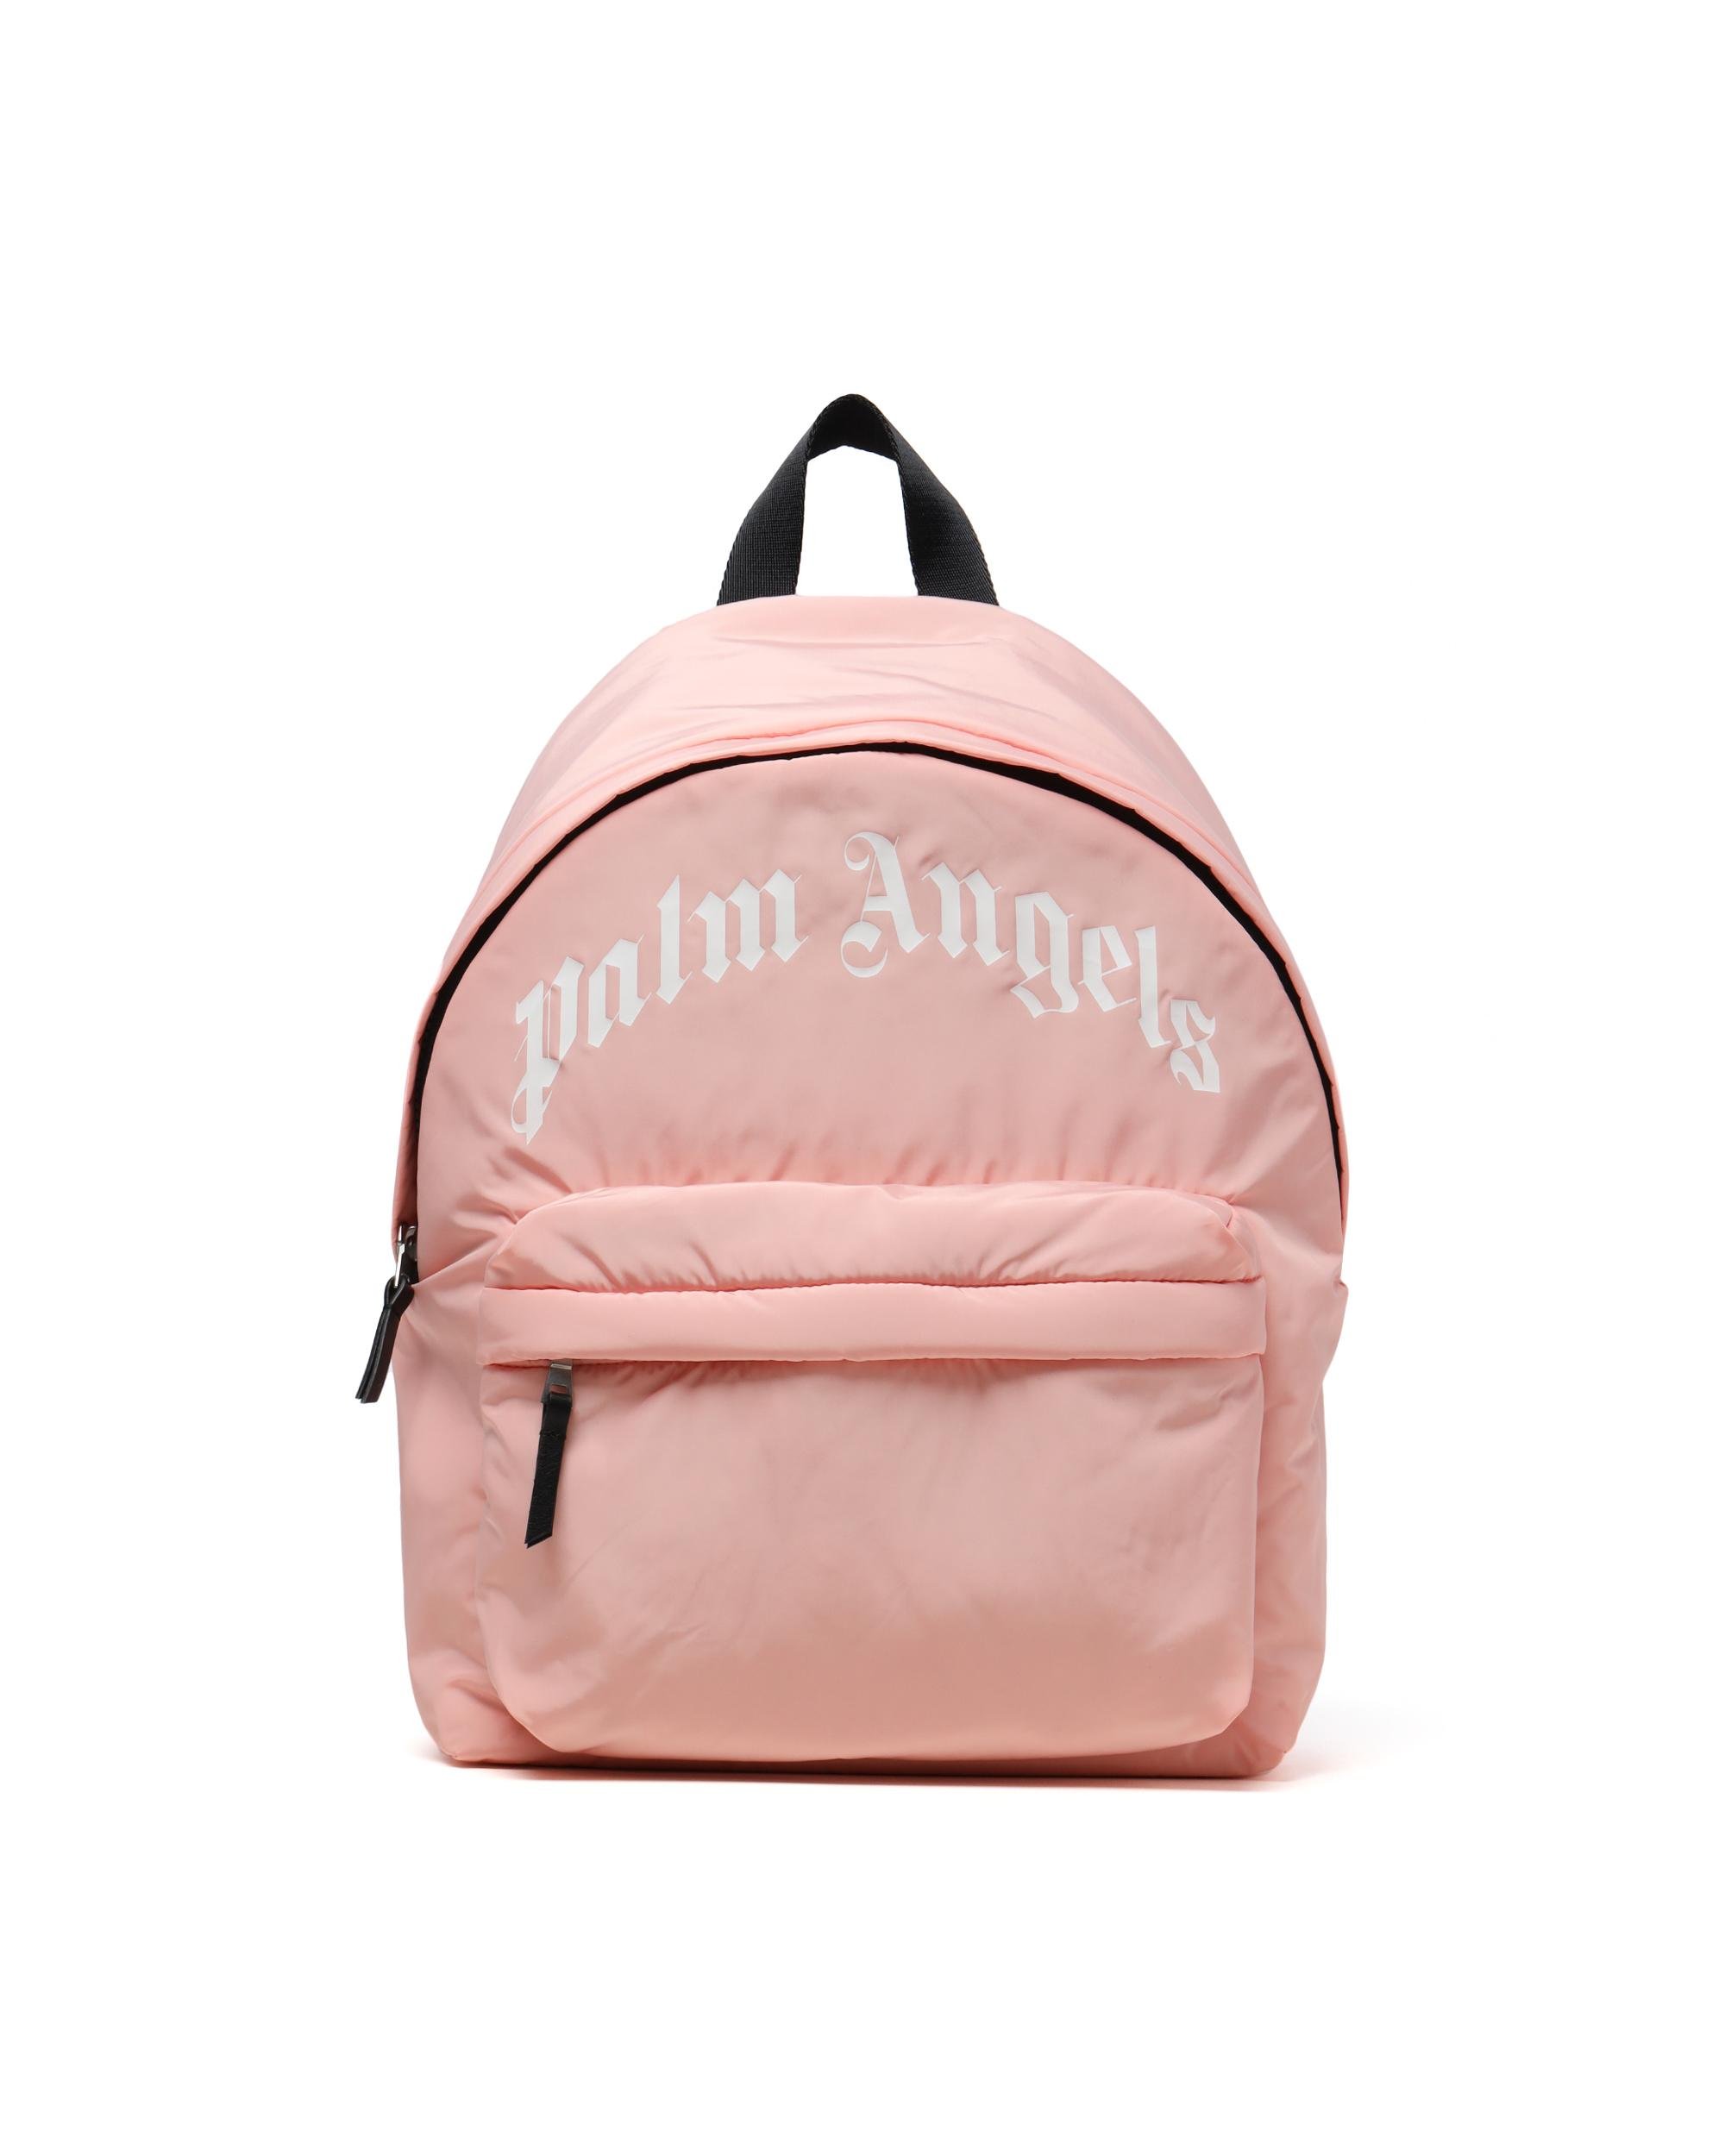 Kids logo backpack by PALM ANGELS